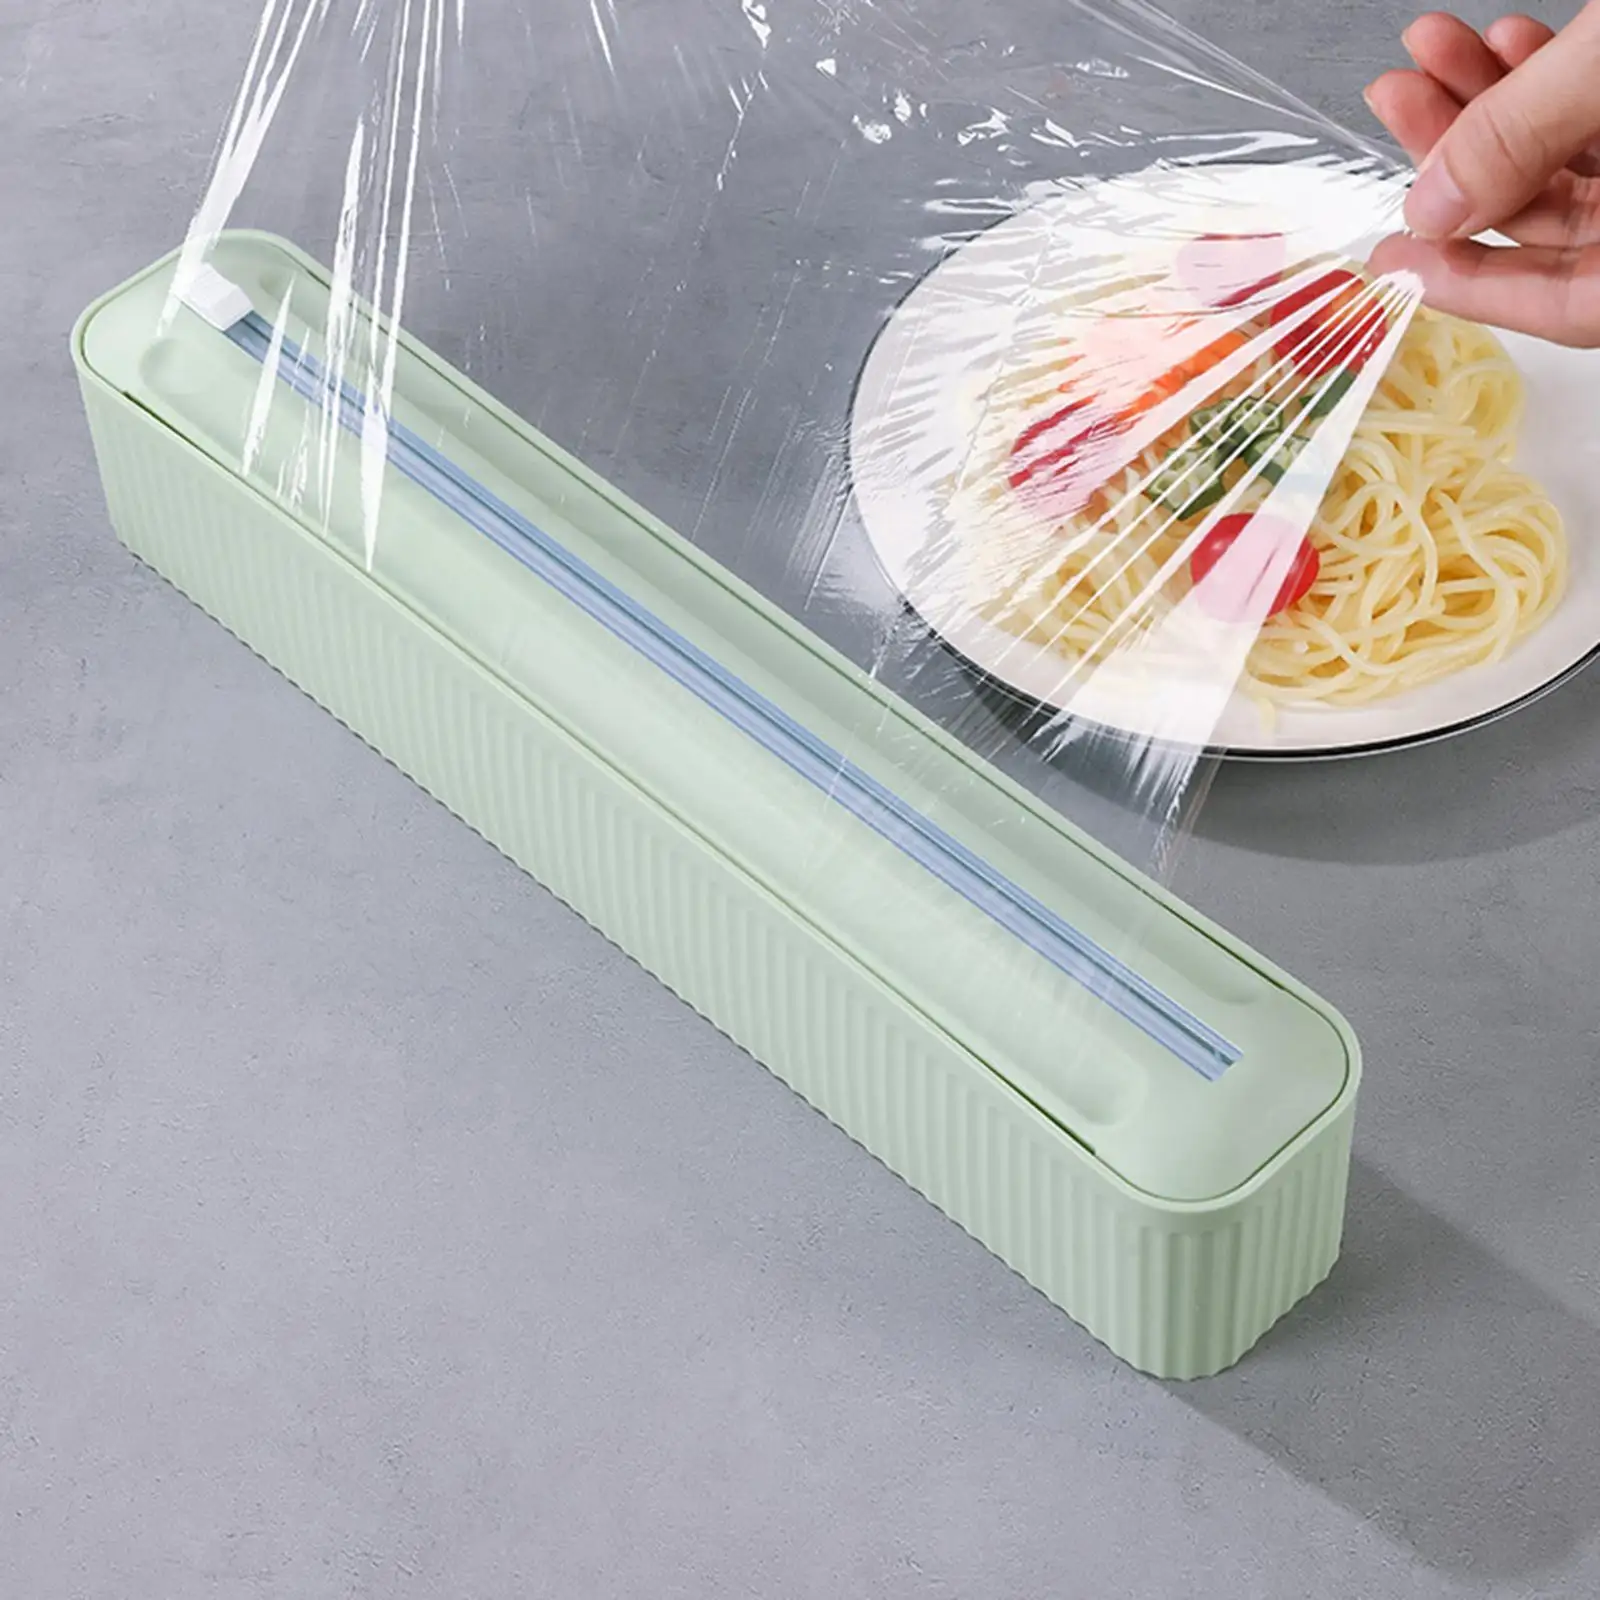 Cling Film Dispenser Aluminum Foil Dispenser Suction Cup with Slide Cutter Reusable Household Food Wrap Cutter for Kitchen Wall